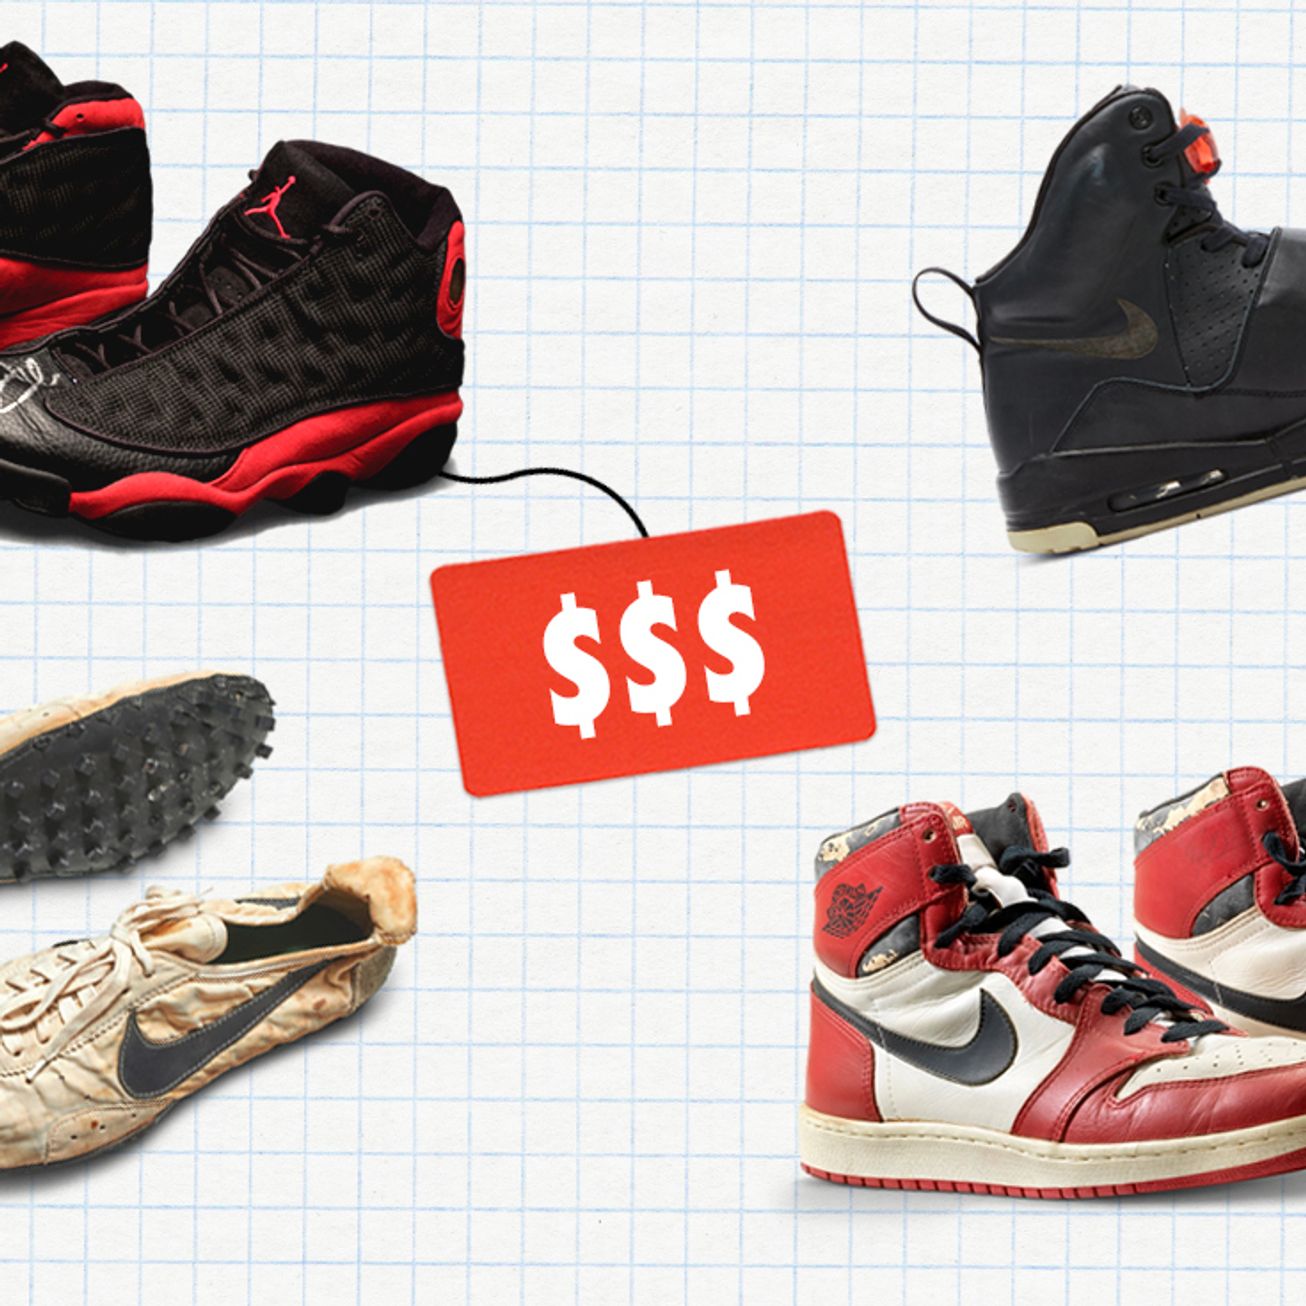 The Top 20 Most Expensive Sneakers Ever Sold at Auction! - Sneaker Freaker